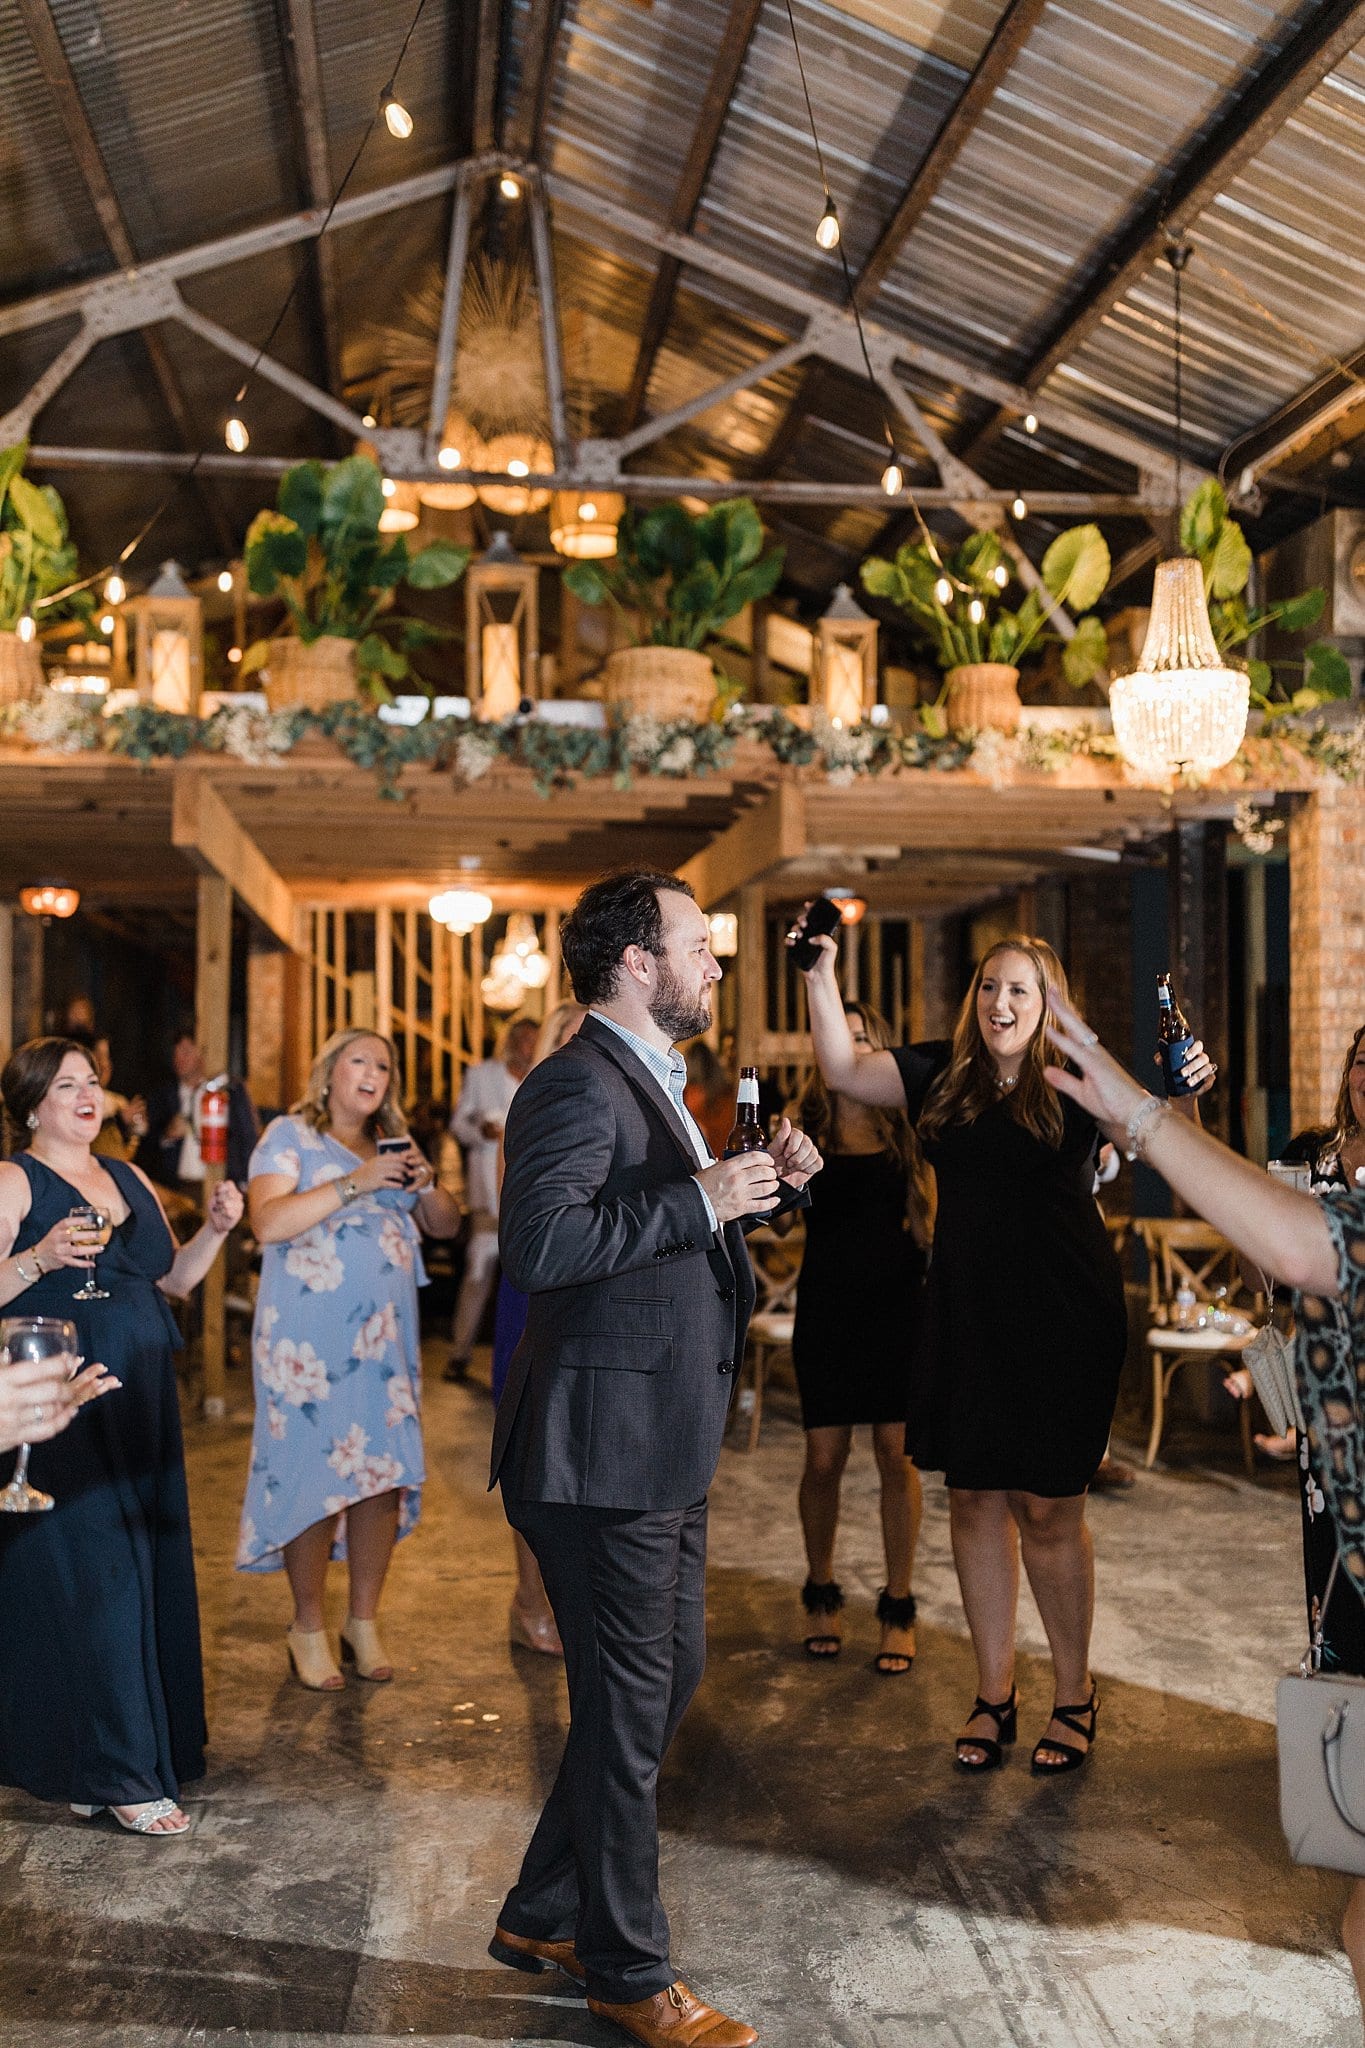 guests dancing to live band at wedding reception